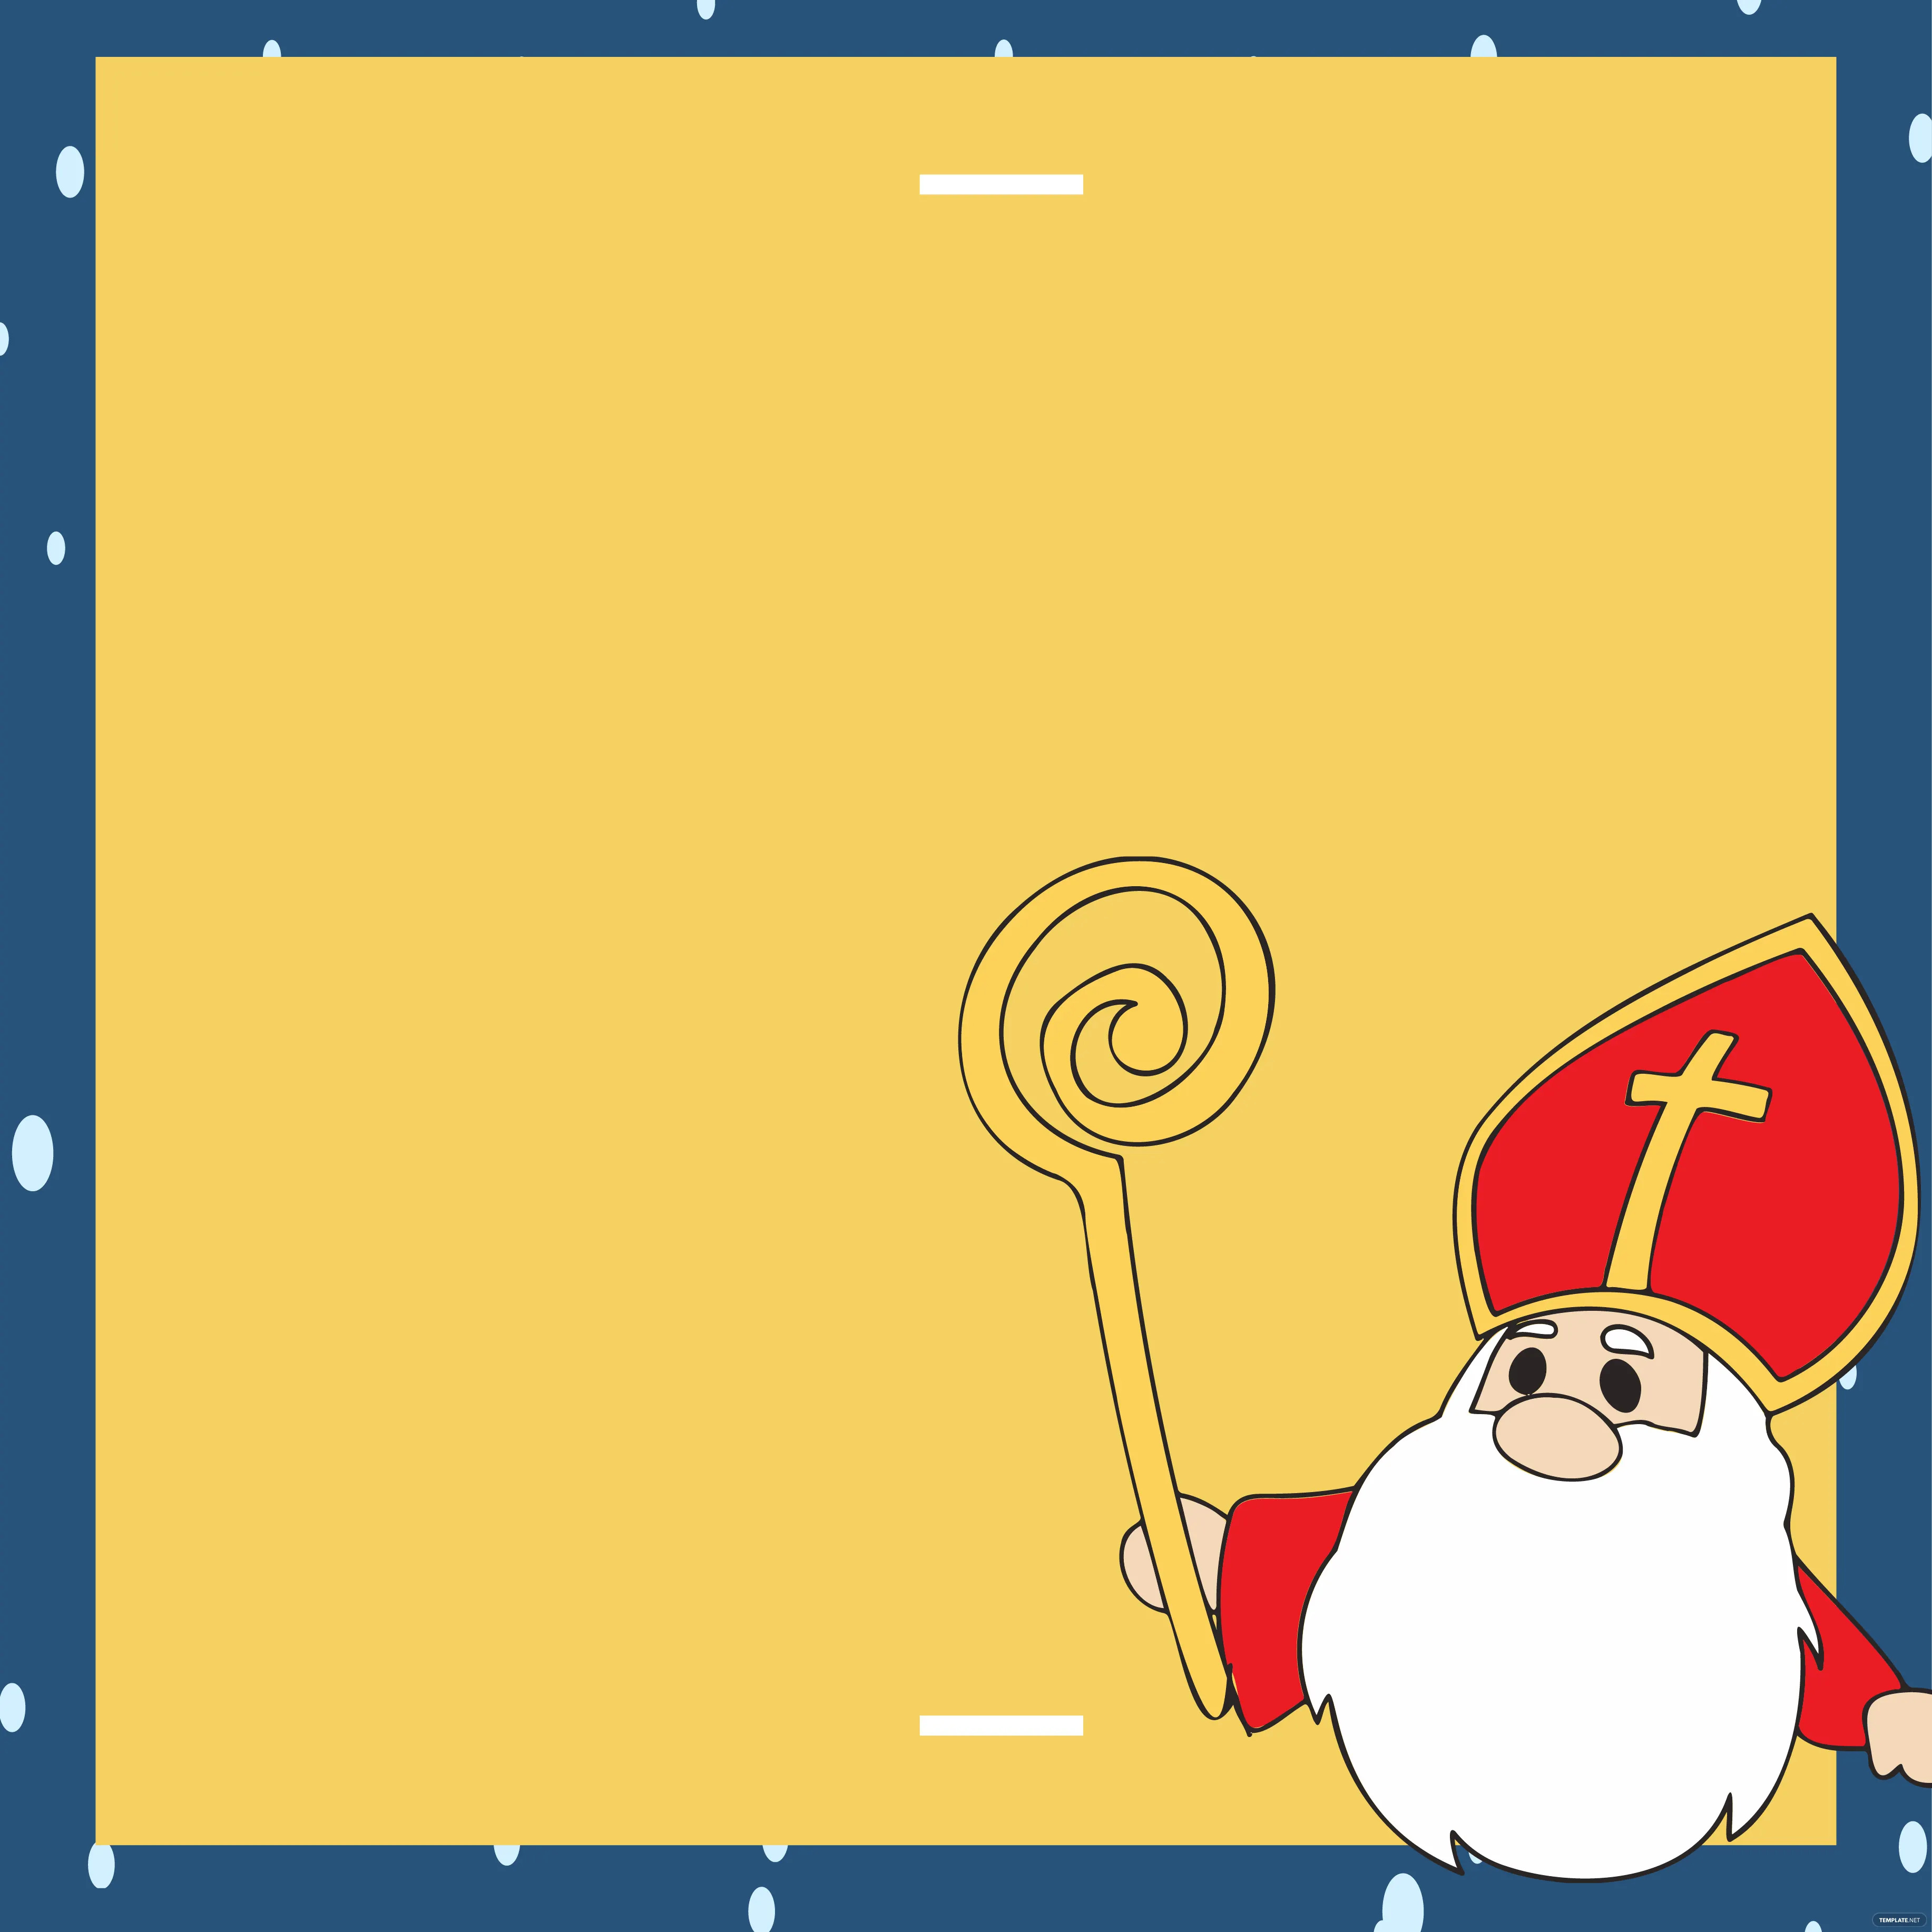 saint nicholas day image background ideas and examples